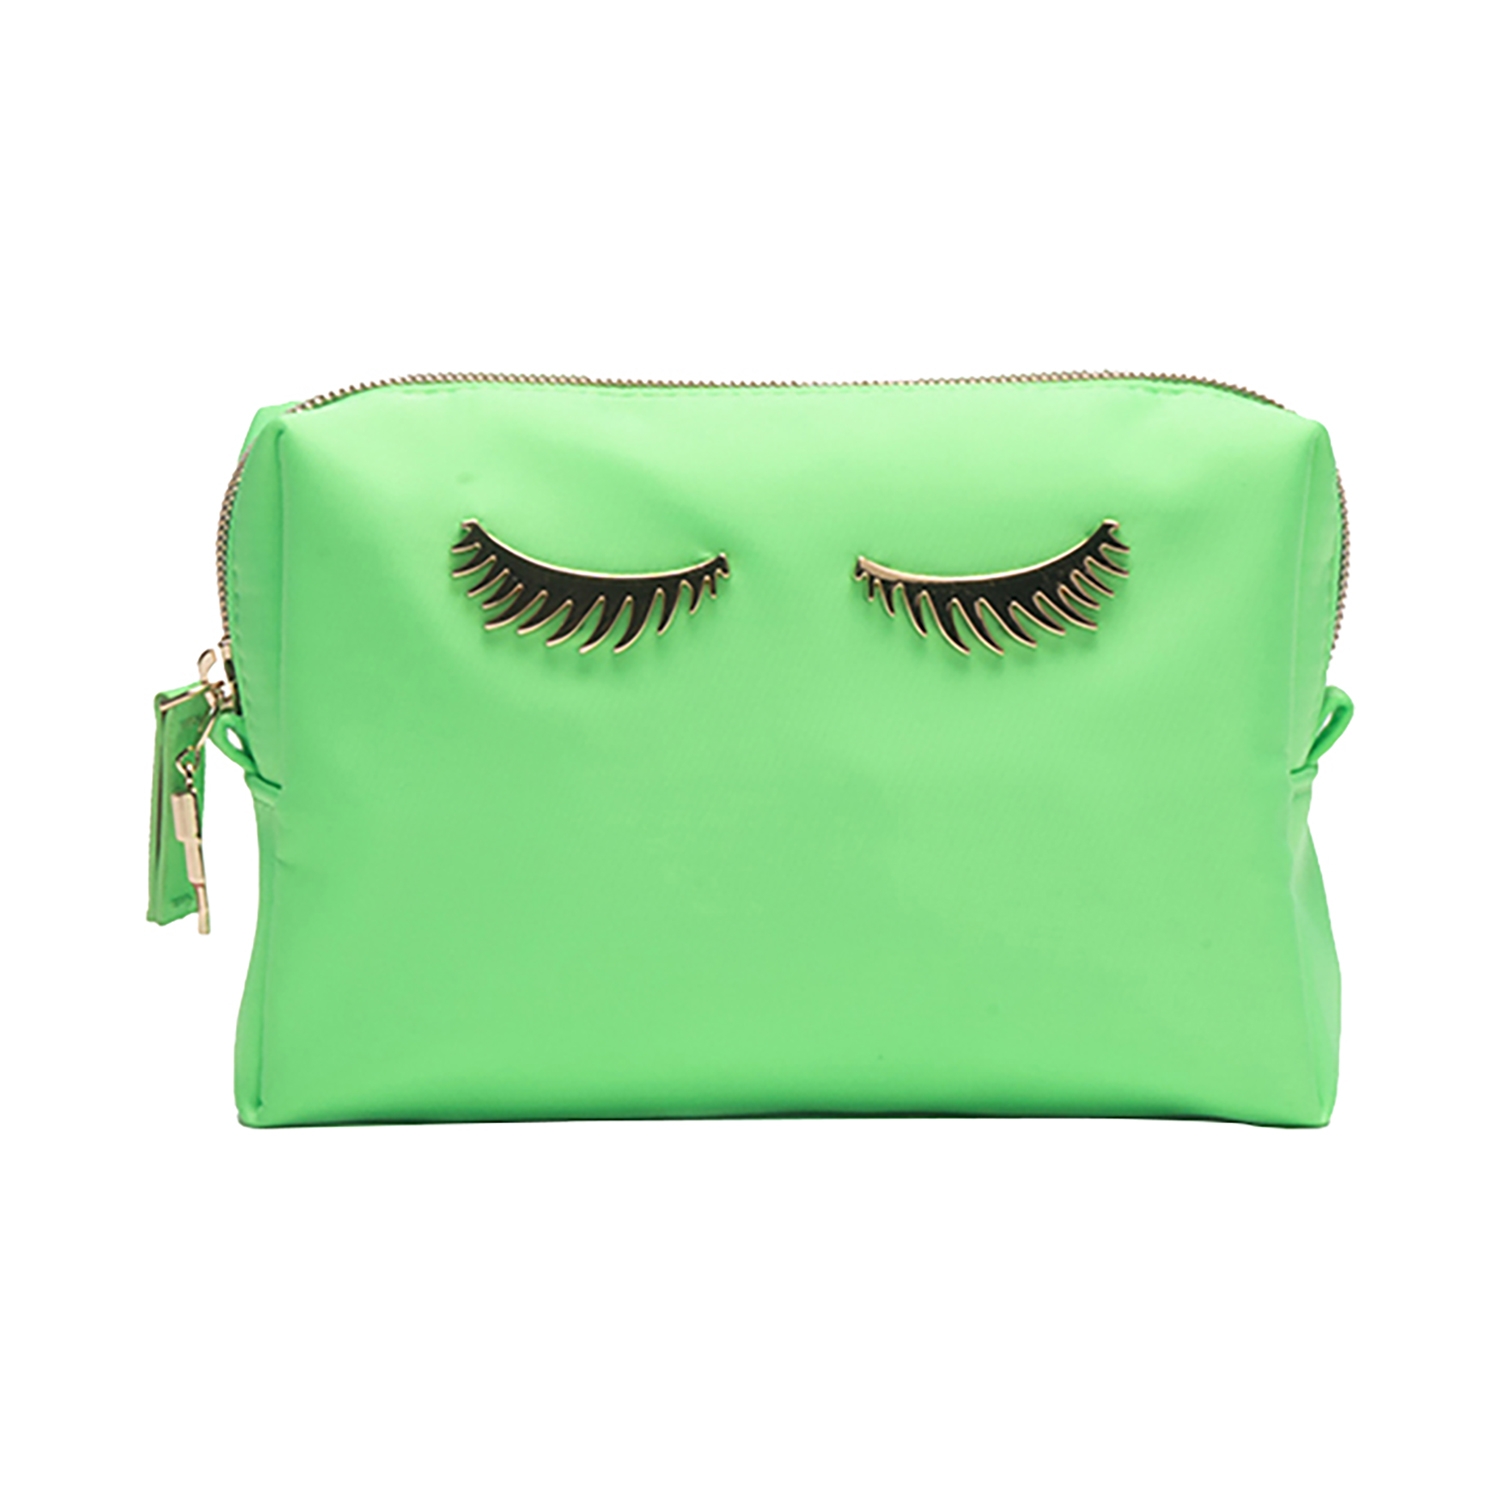 Colorbar | Colorbar Lips & Lashes Small Pouch - Neon Green